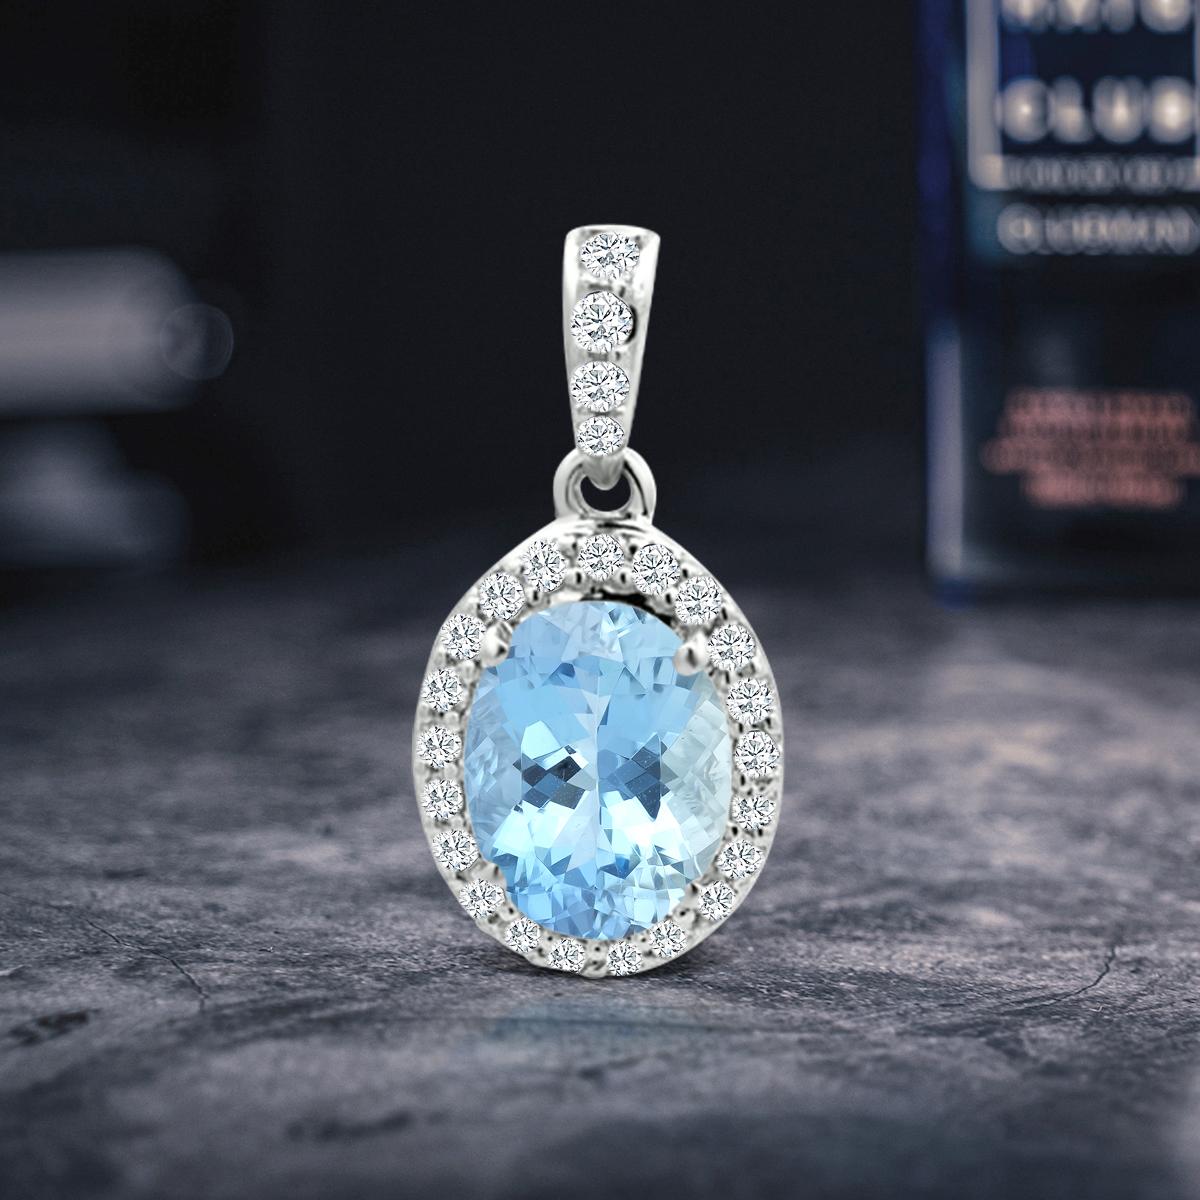 14K White Gold 1.10cts Aquamarine and Diamond Pendant, Style#TS1247AQP 21064/7 In New Condition For Sale In New York, NY